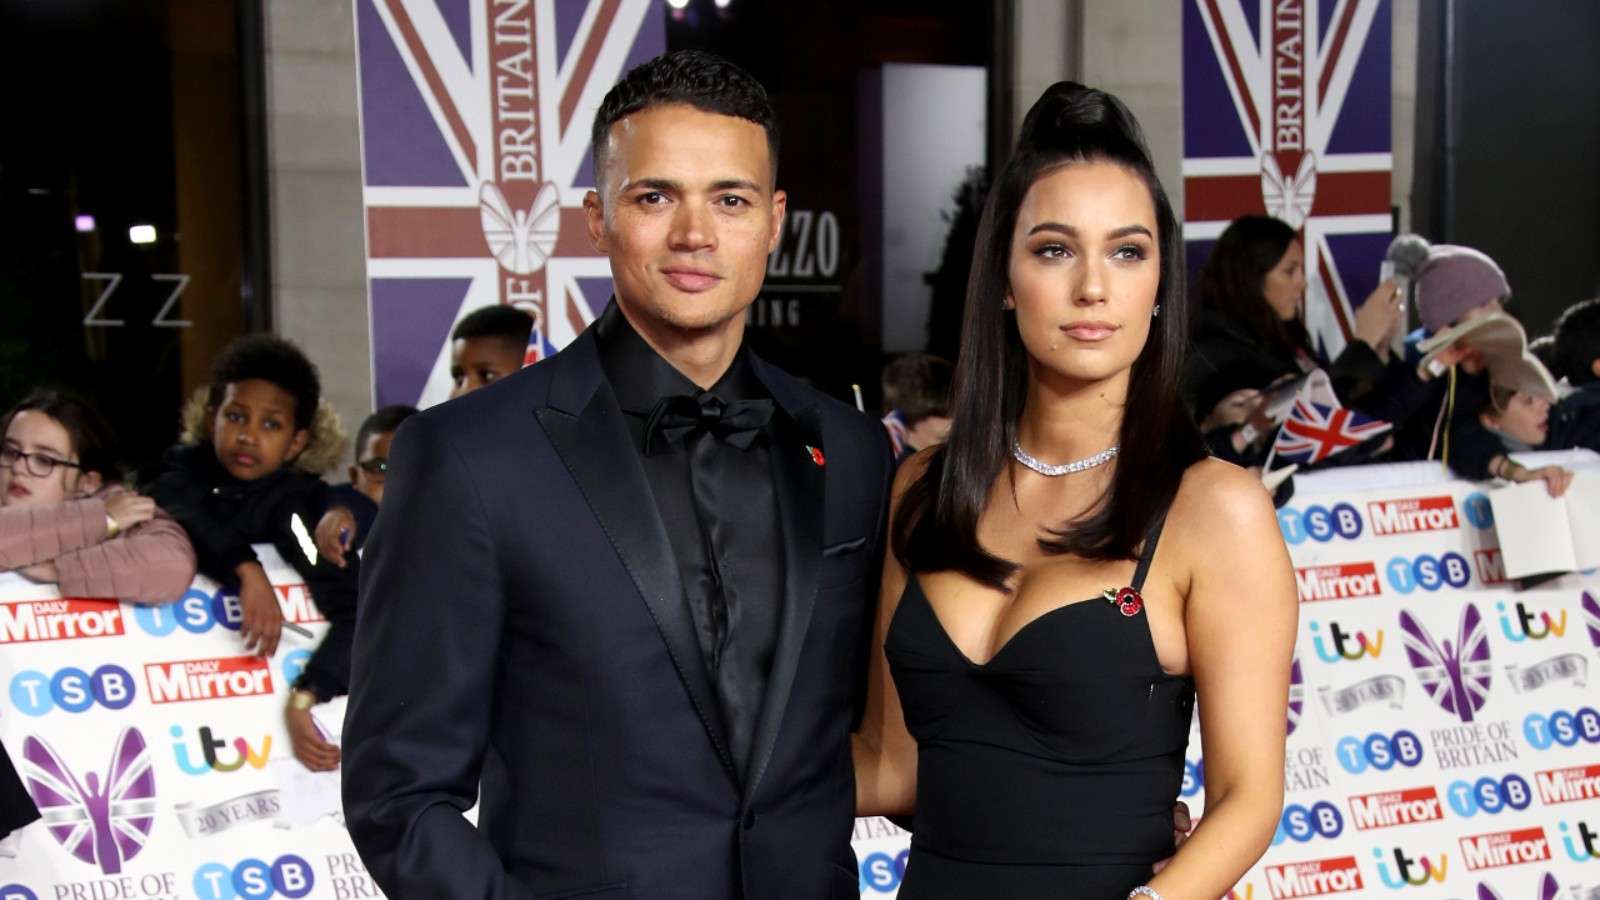 Jermaine Jenas' Wife Ellie Penfold Biography: Age, Net Worth, Pictures, Husband, Children, Height